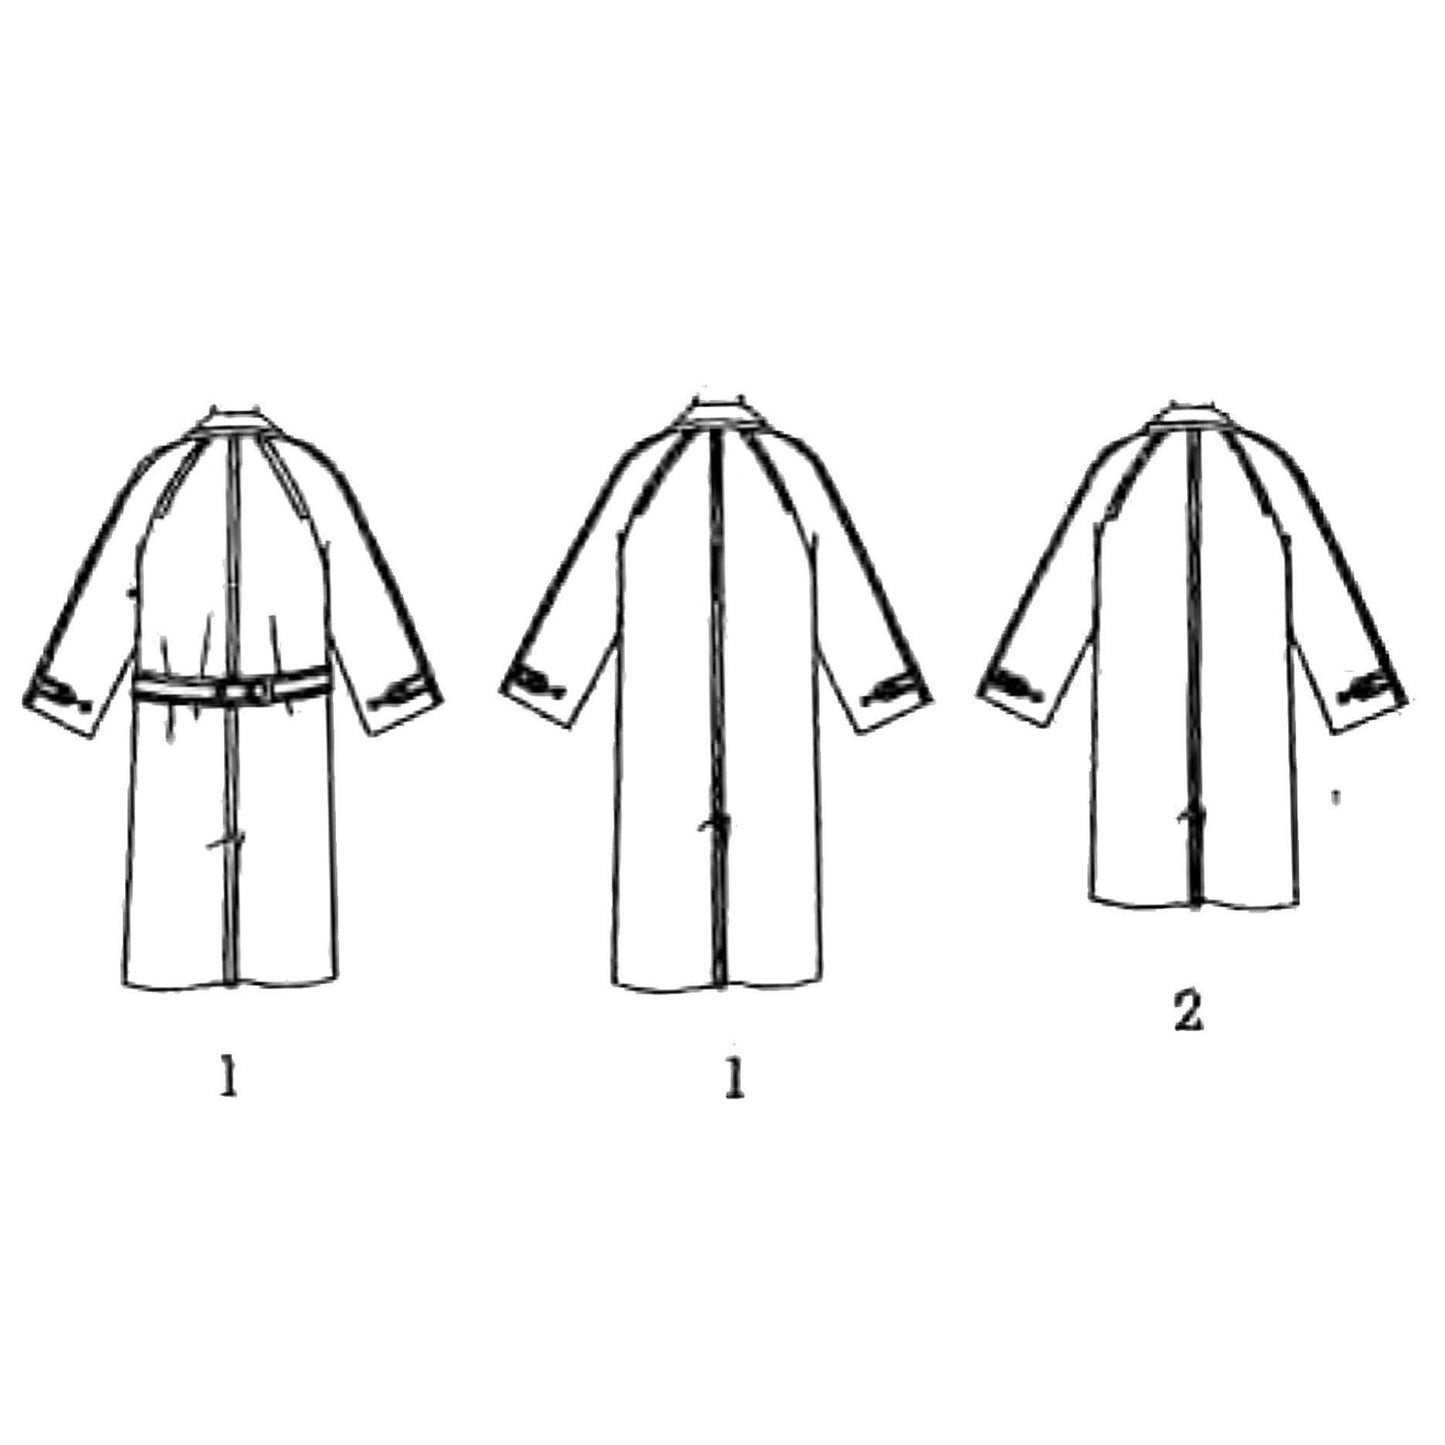 Line drawing of coats